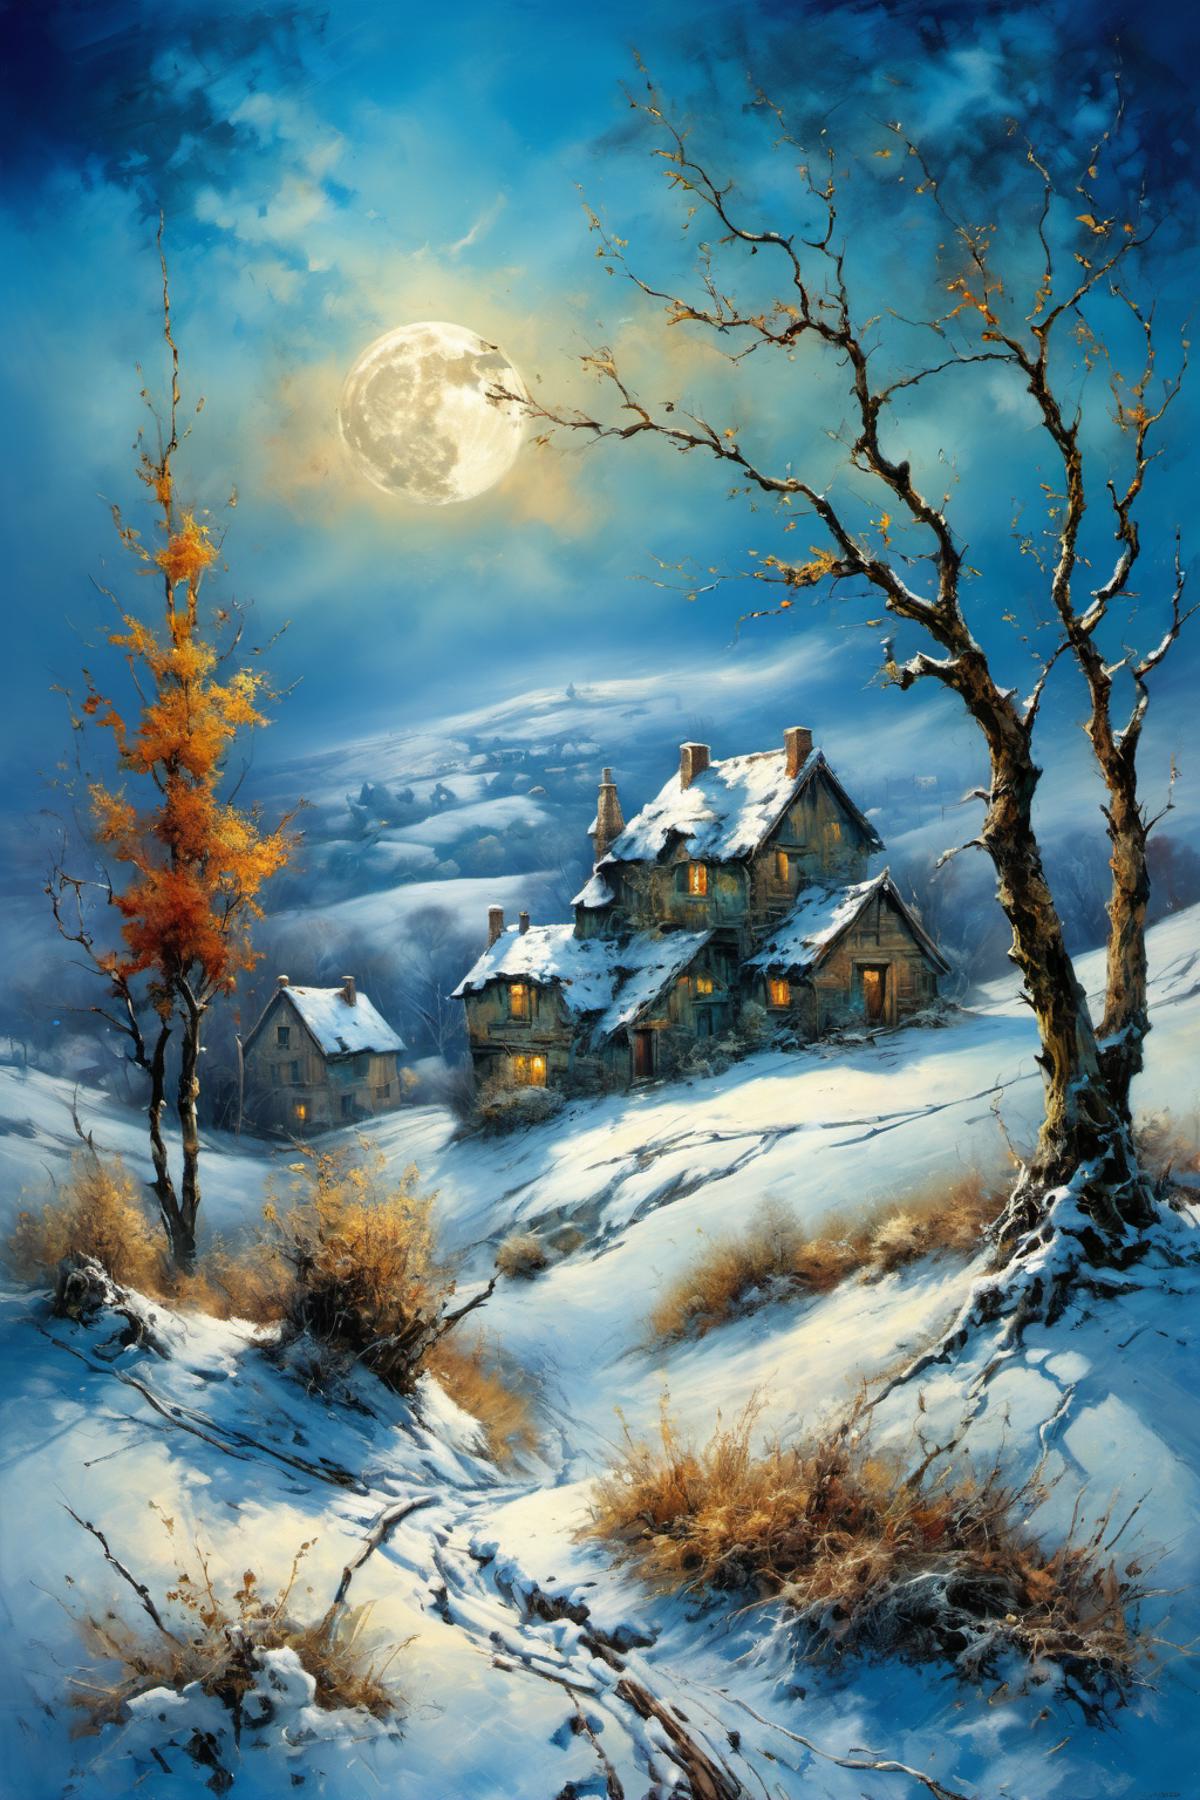 A snowy landscape with a house and a moon in the background.